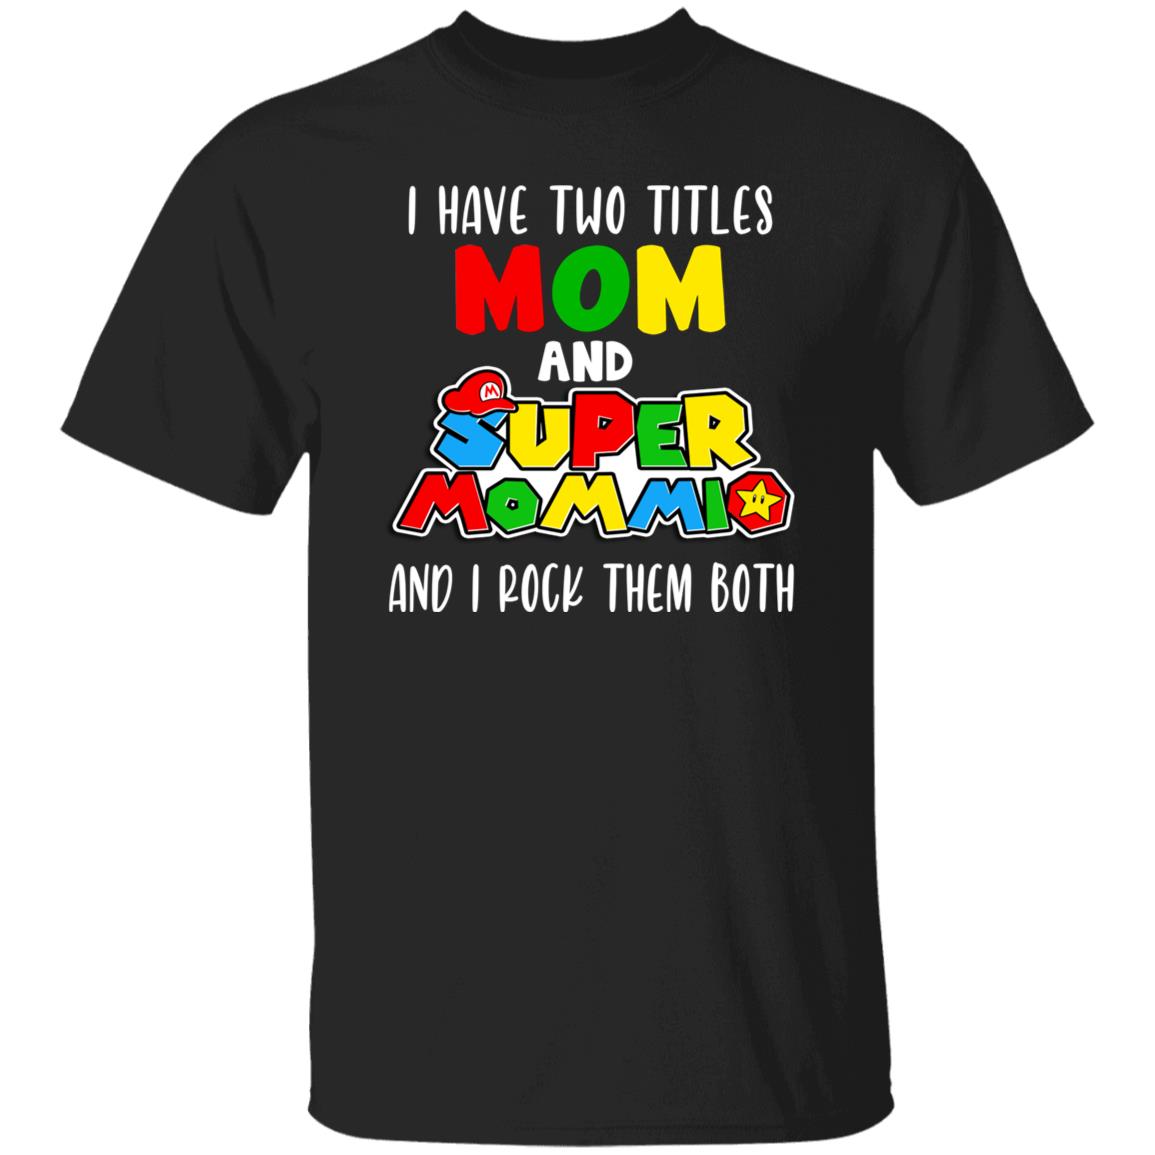 I Have Two Titles Mommio Gamer Mother Shirt